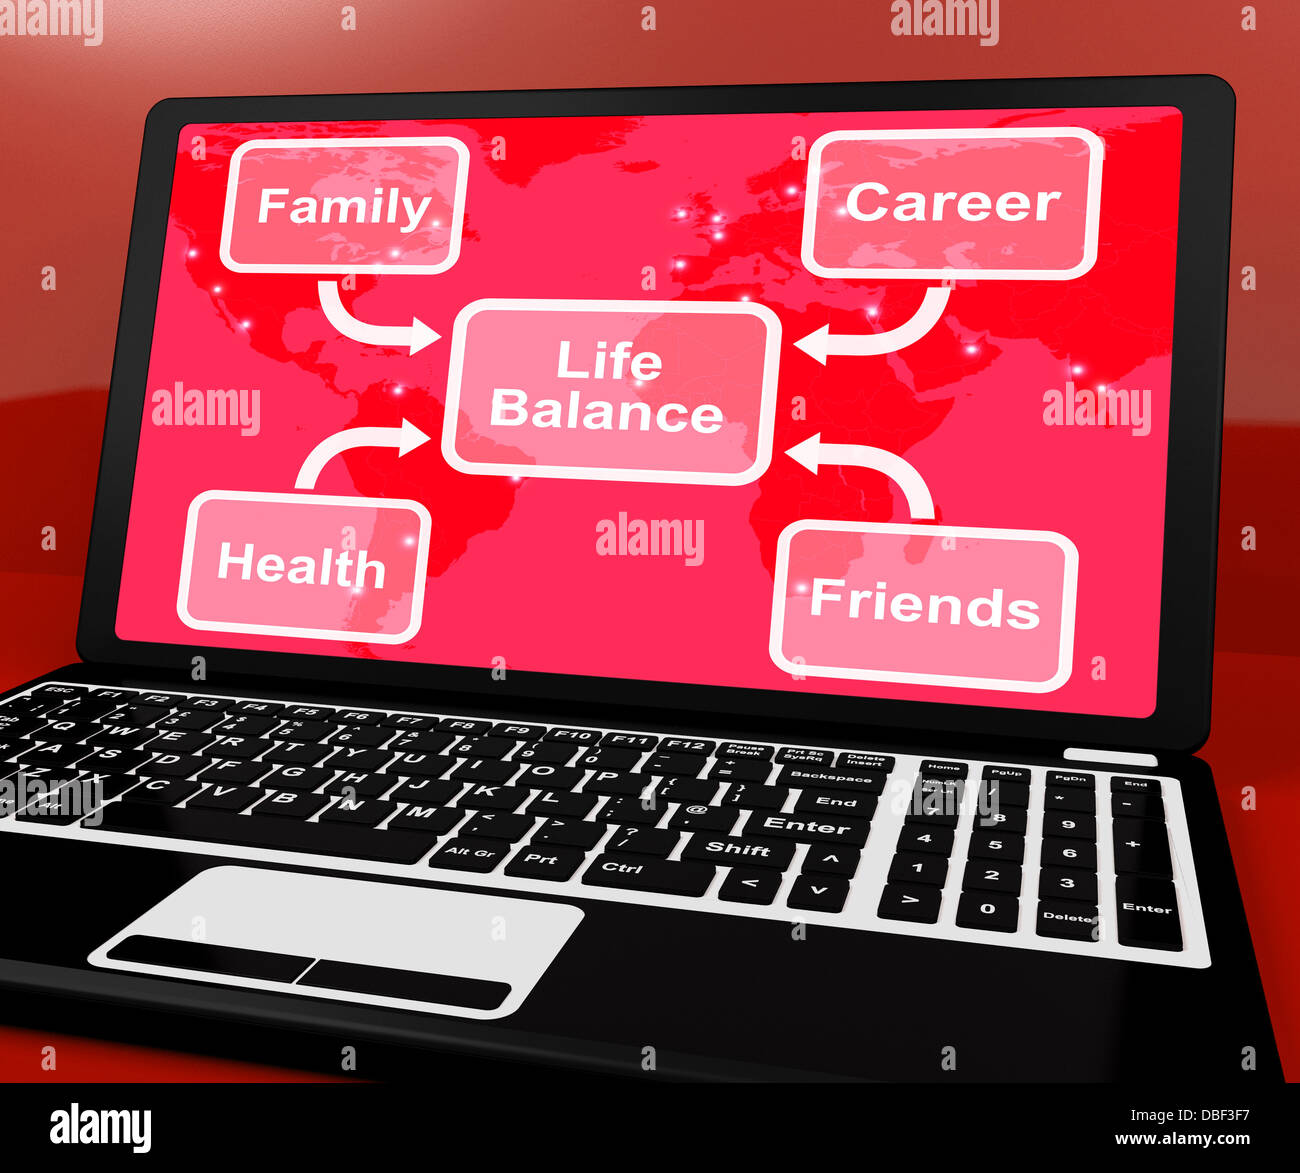 Life Balance Diagram On Computer Shows Career And Friends Stock Photo